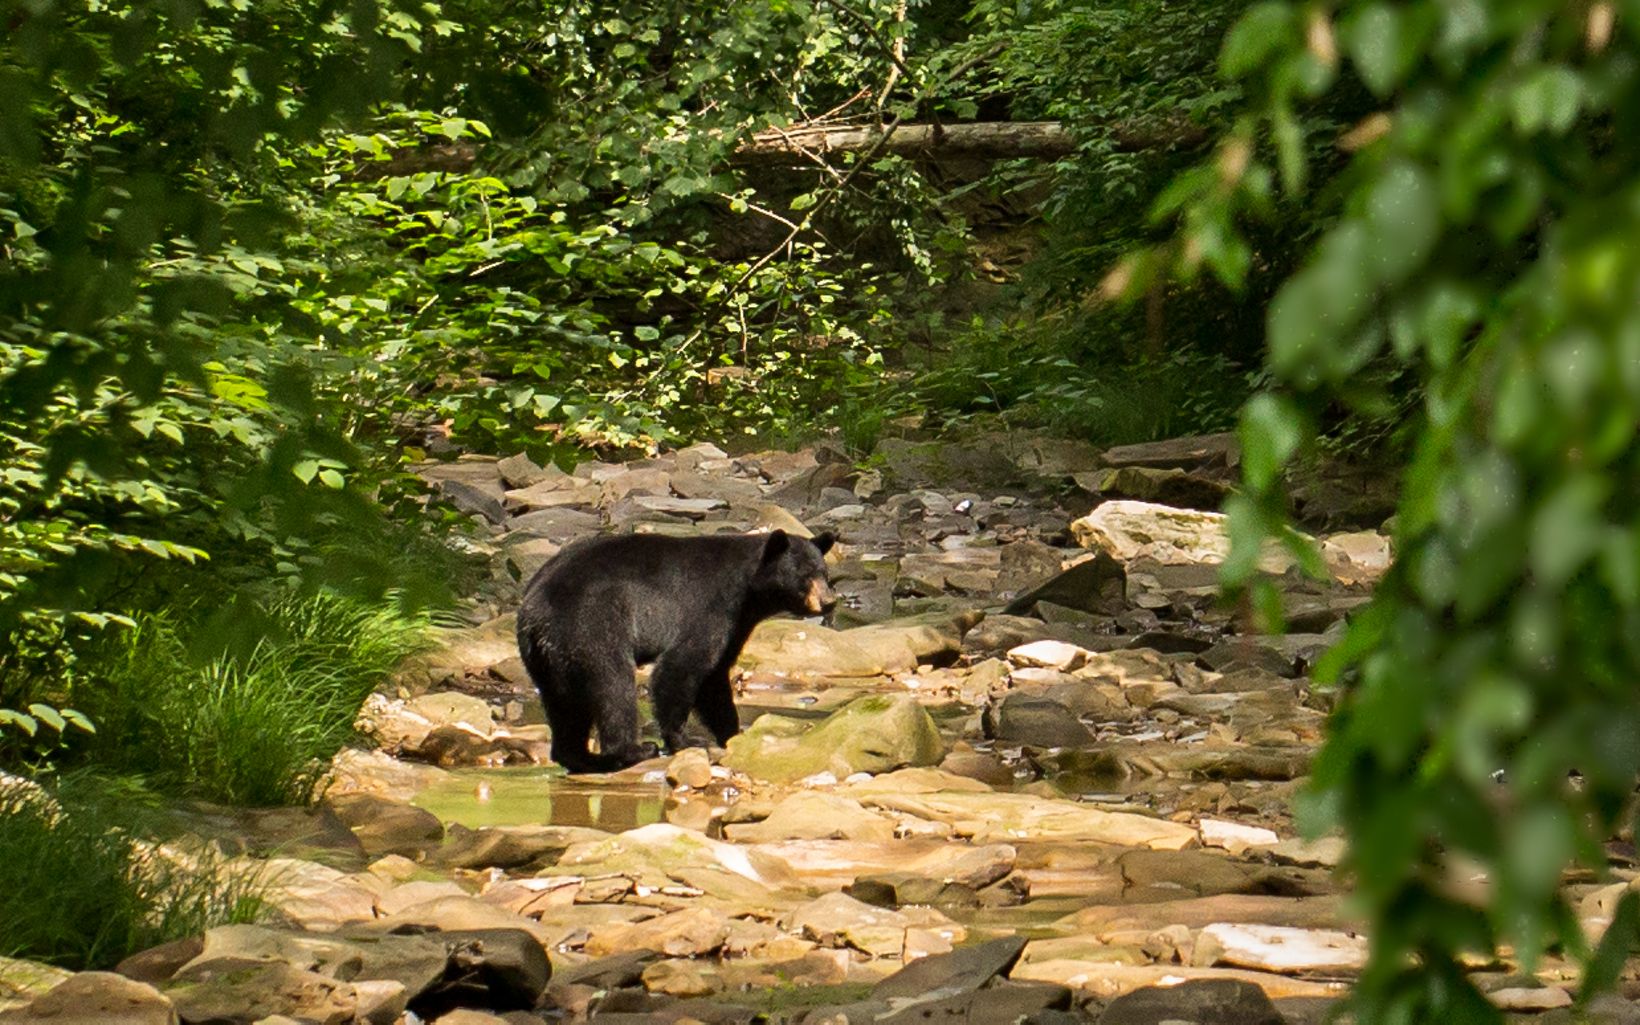 Black Bear Our goal to connect our Edge of Appalachia Preserve System and nearby Shawnee State Forest will provide protected habitat corridors for more wildlife like black bear & bobcat. © David & Laura Hughes